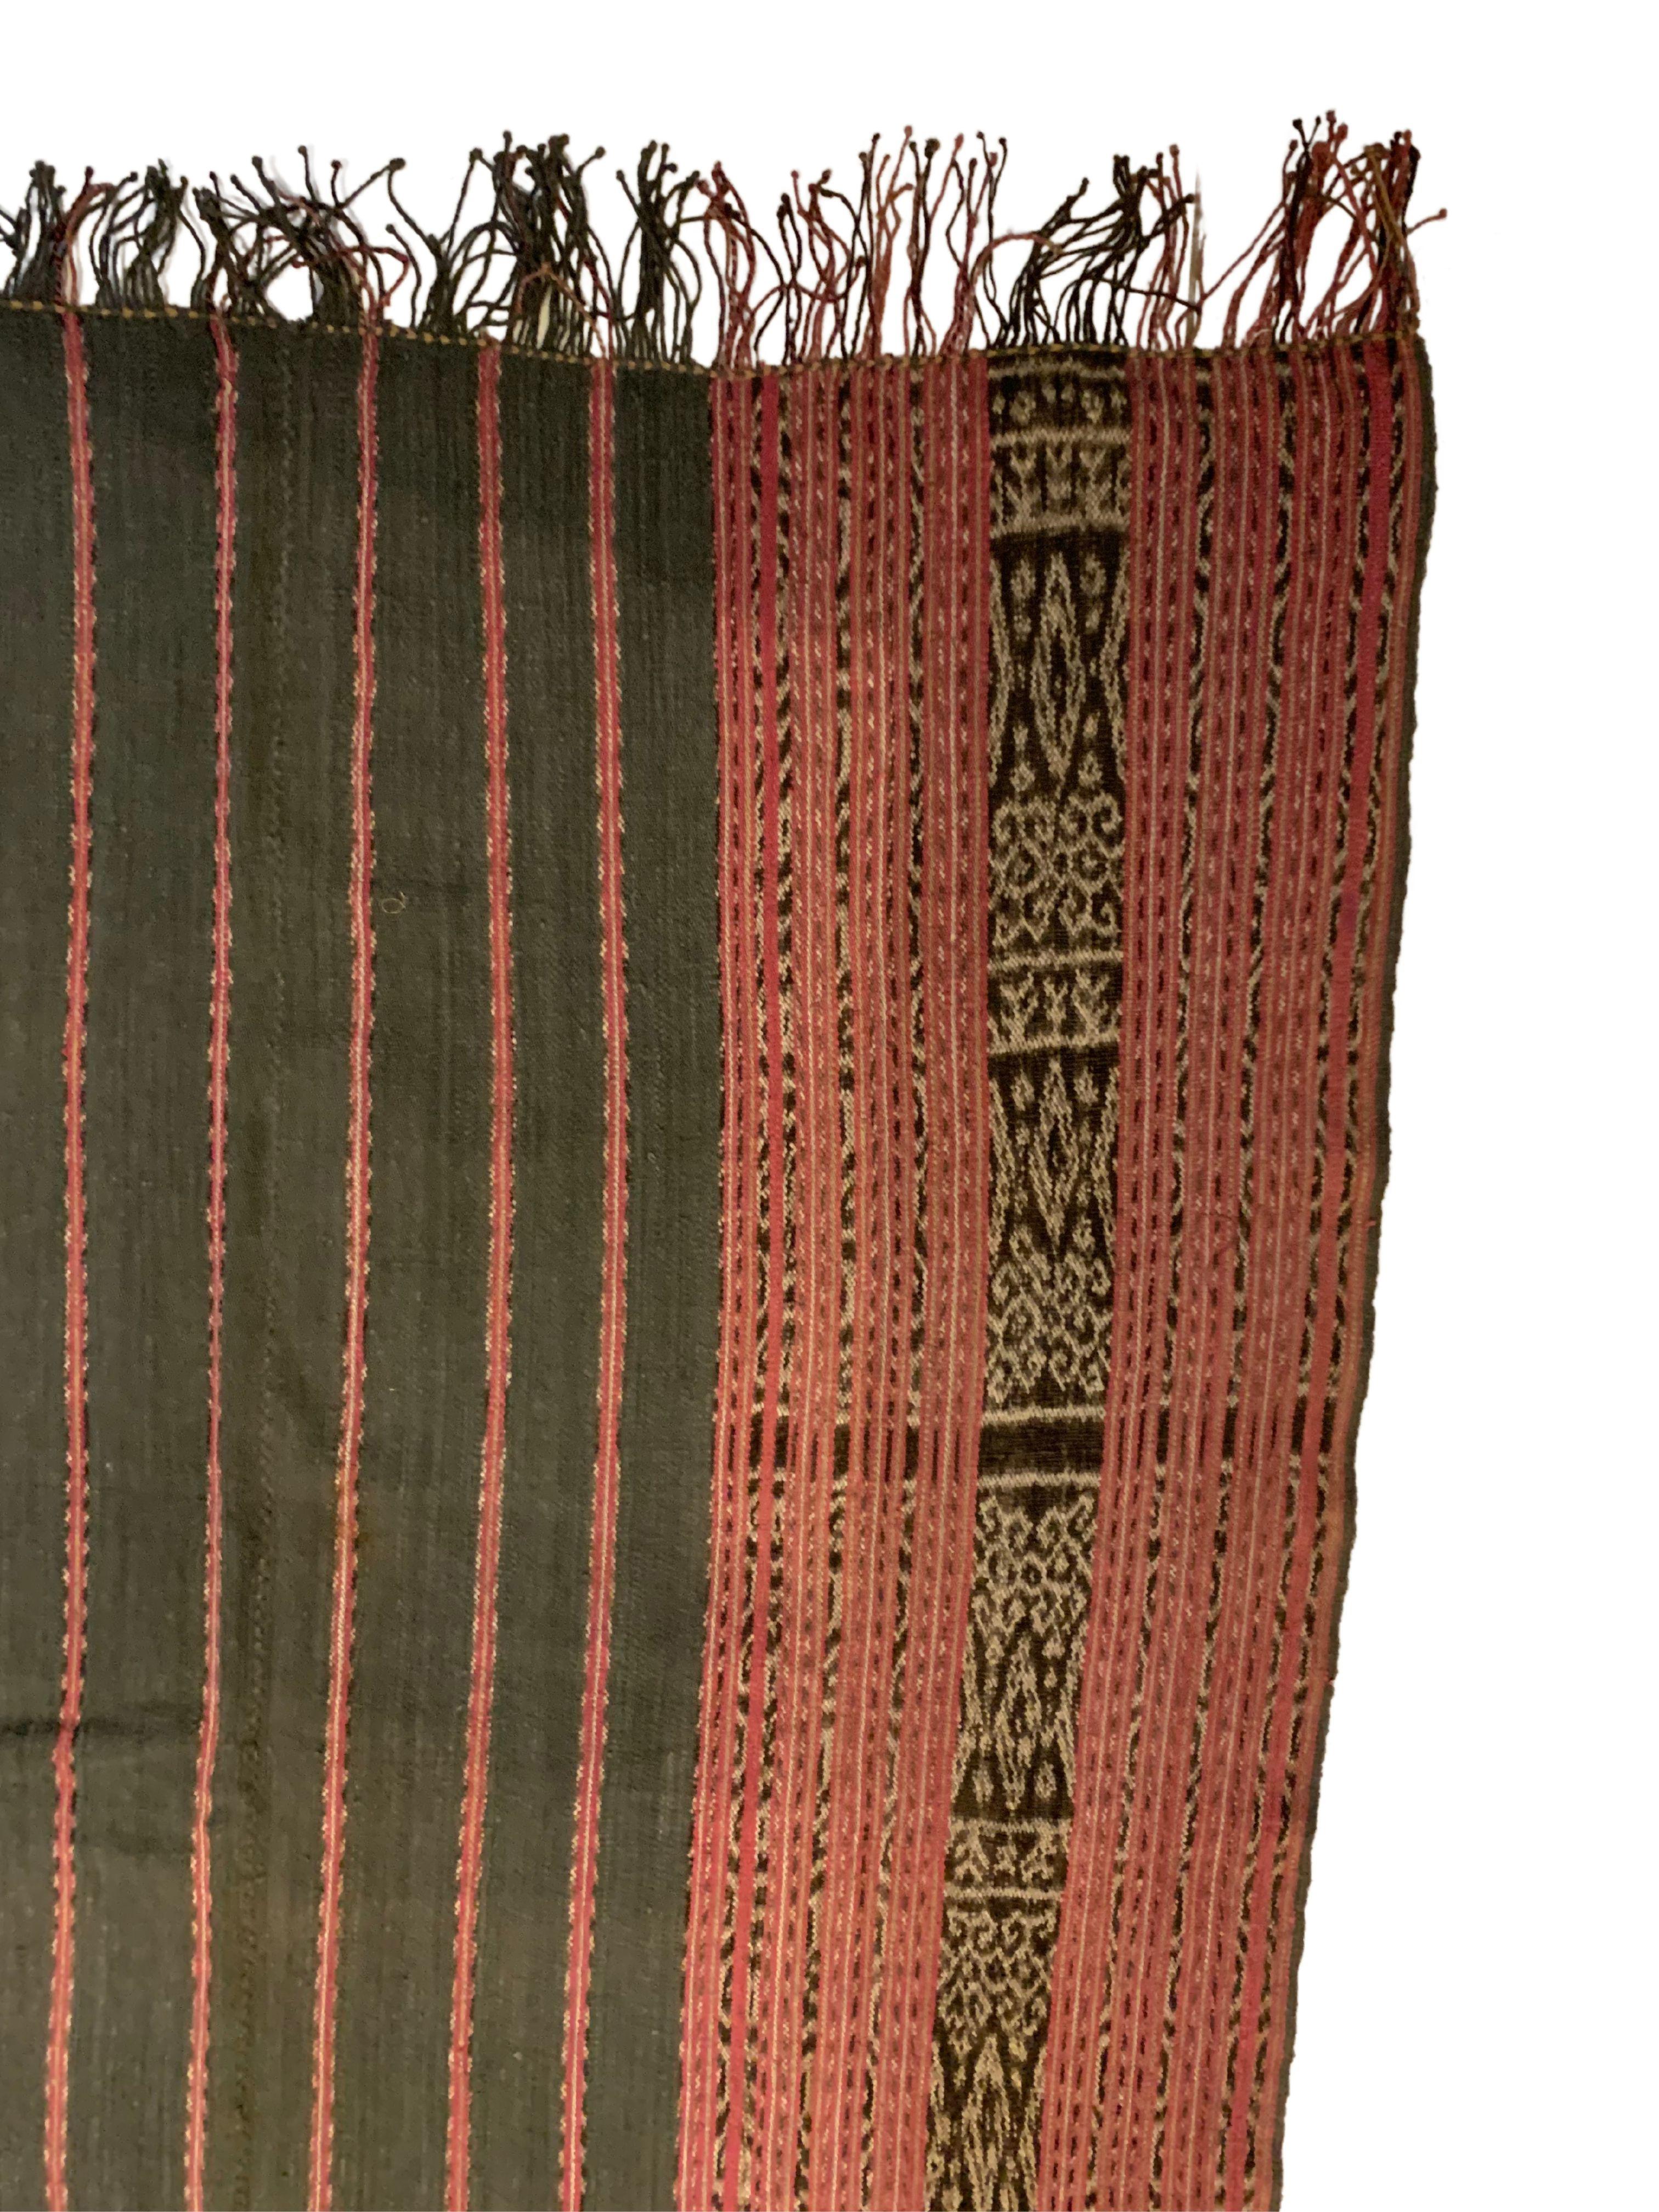 An wonderful example of a west timor ikat textile. It is hand-woven using naturally dyed yarns via a method passed on through generations. It features a stunning array of distinct tribal patterns and bright colours. Textiles such as this one are